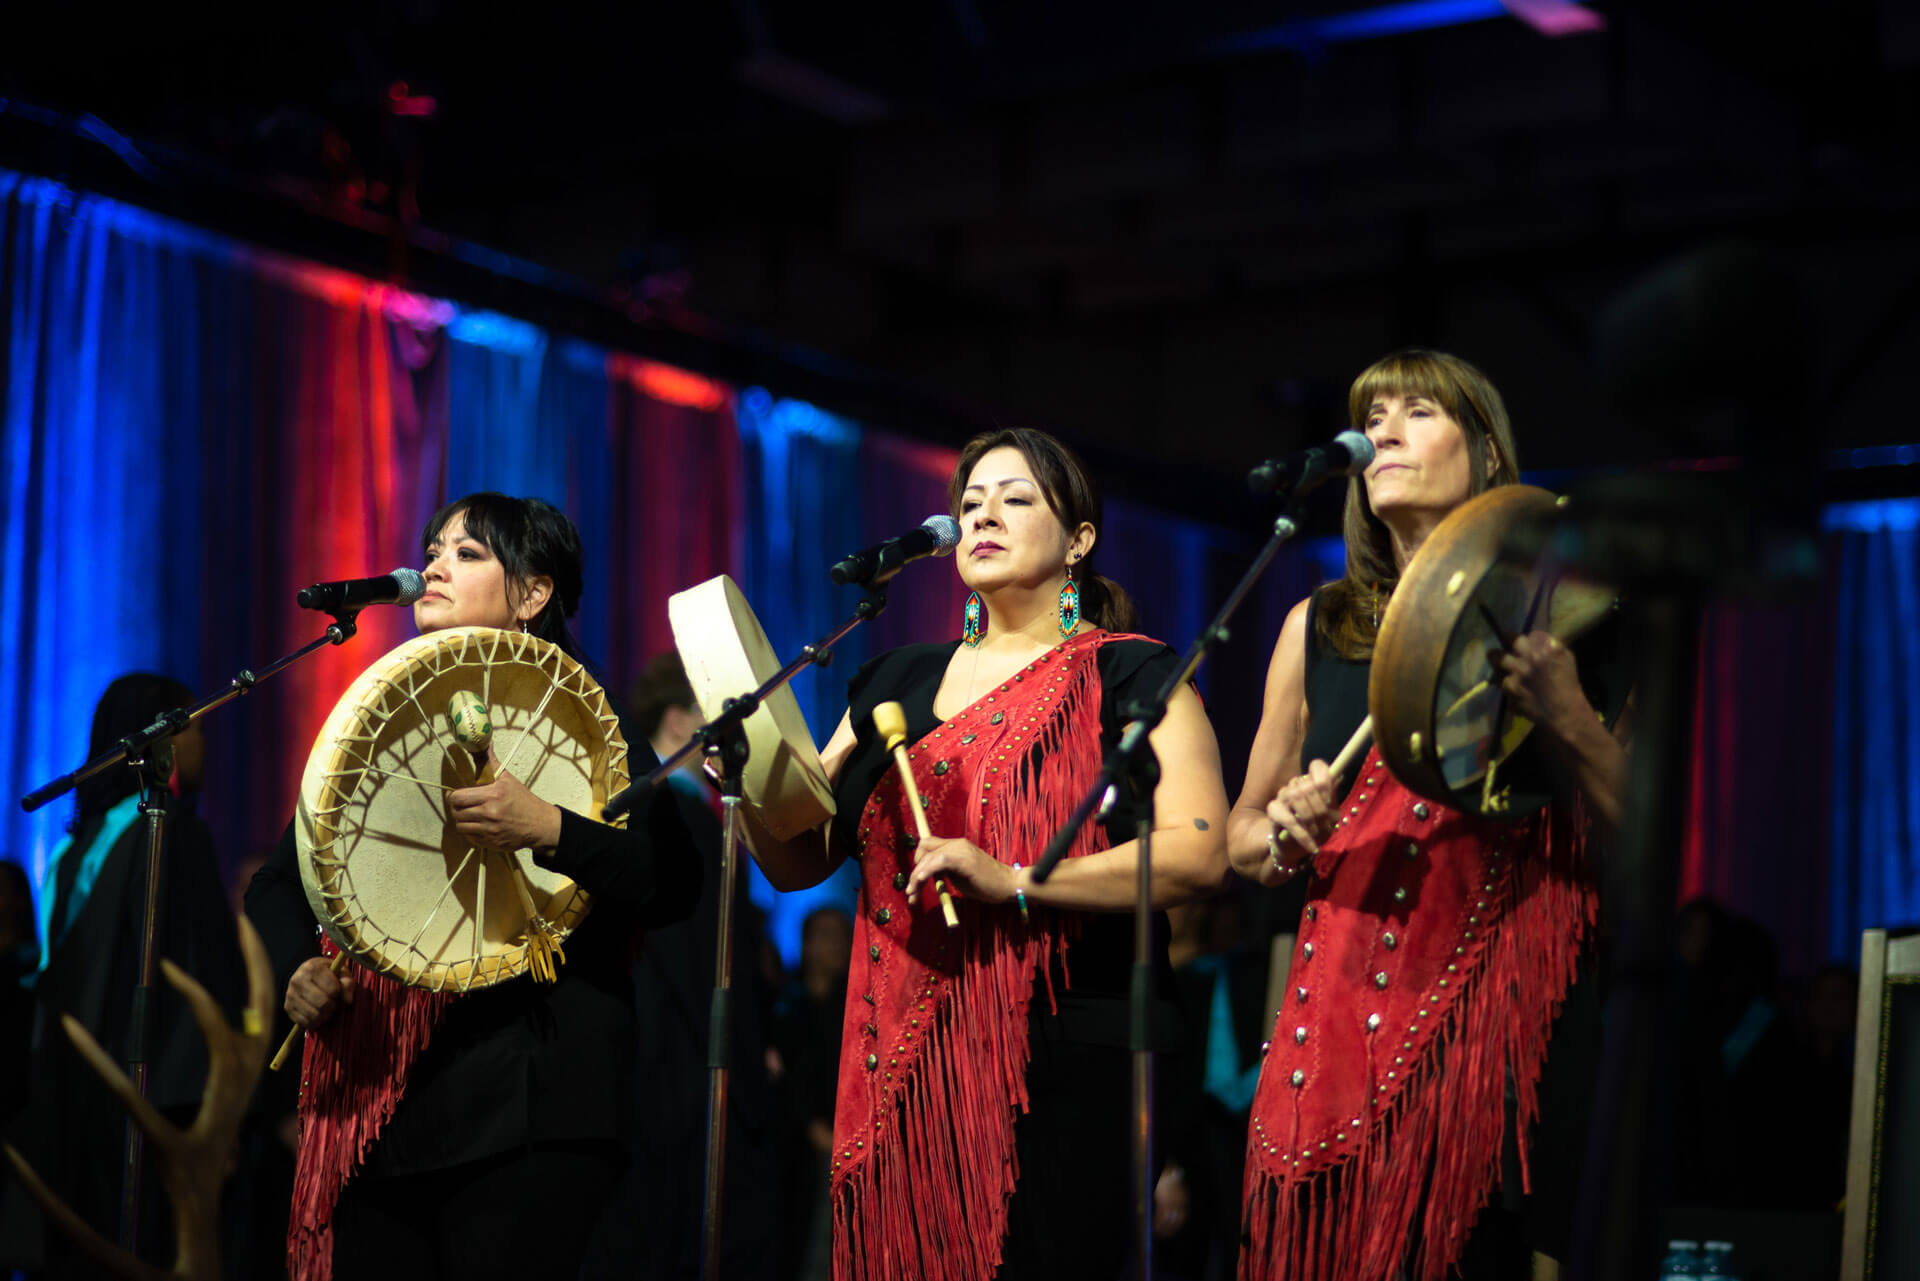 Members of ASANI sing and perform drums during opening ceremonies at convocation in Westerner Park Exhibition Hall in 2019.